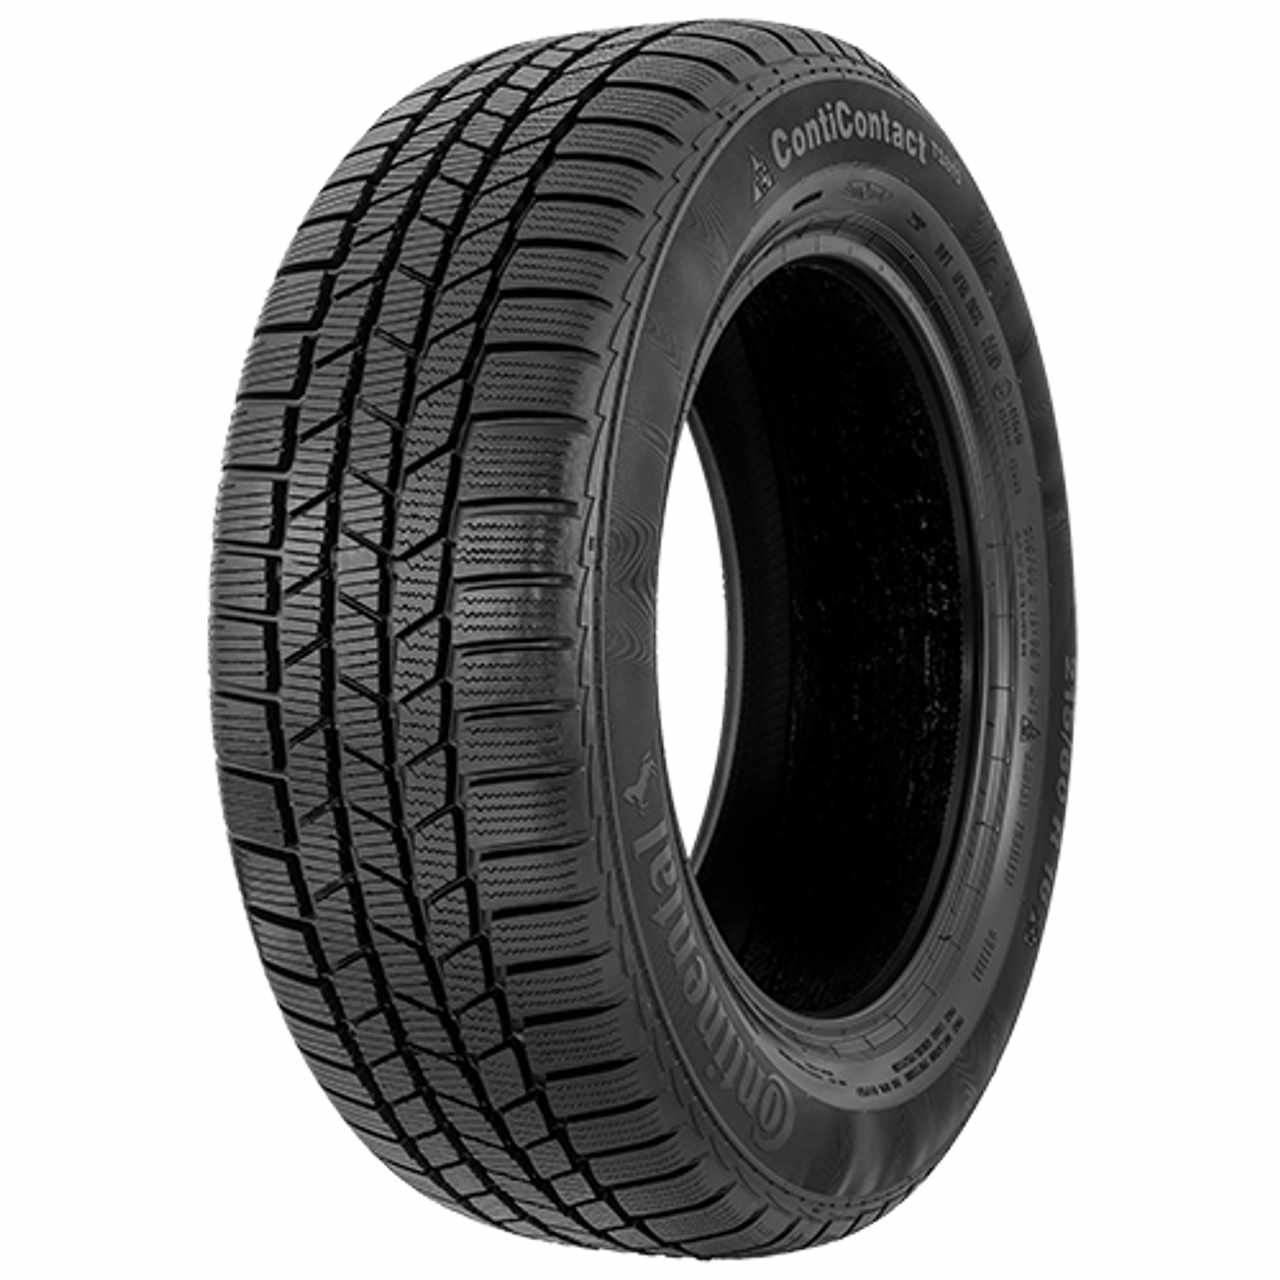 CONTINENTAL CONTICONTACT TS 815 205/60R16 96H BSW von Continental